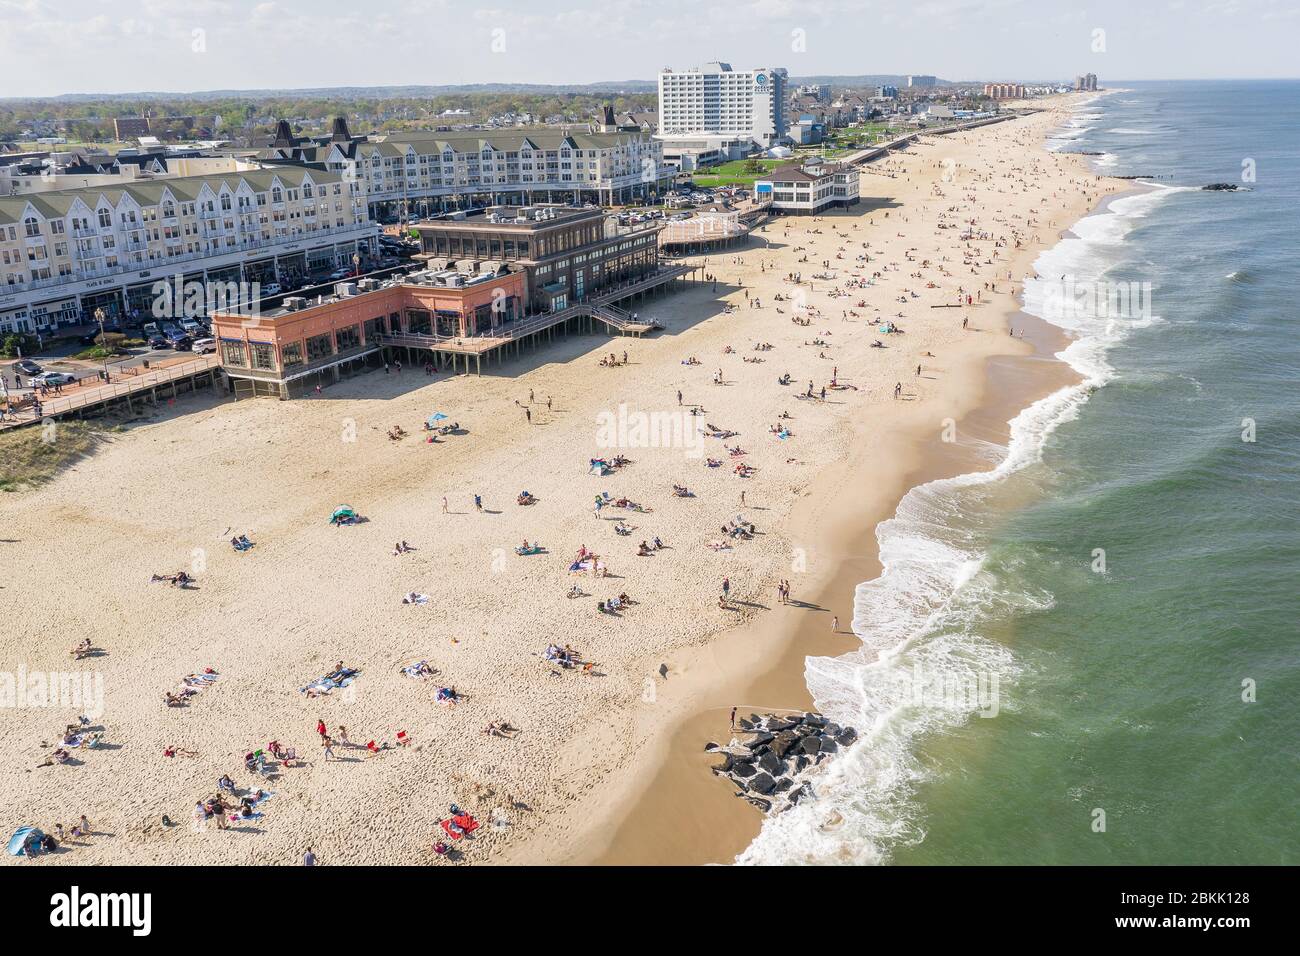 Aerial view of a crowded Jersey Shore beach in Long Branch, New Jersey.  Despite the Coronavirus pandemic beachgoers flocked to the shore amidst the warm weather and recent beach re-openings. Stock Photo